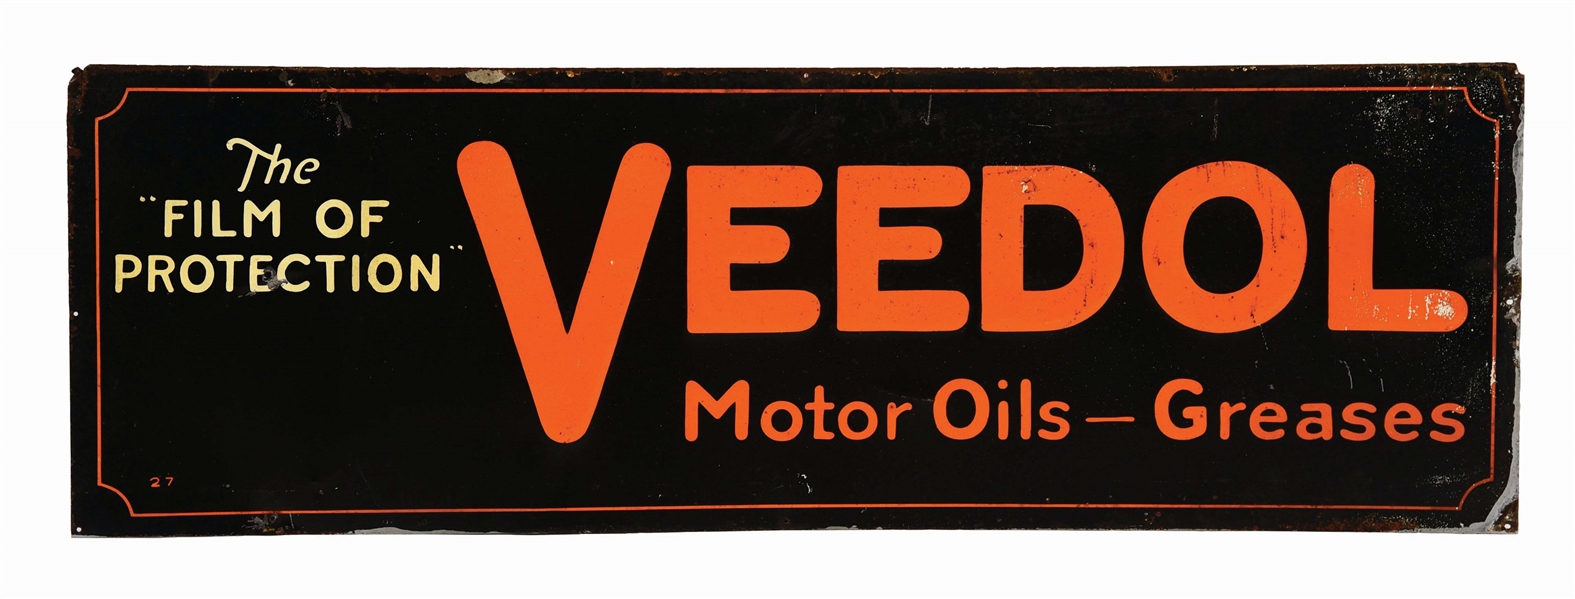 VEEDOL MOTOR OIL & GREASES EMBOSSED TIN SERVICE STATION SIGN. 